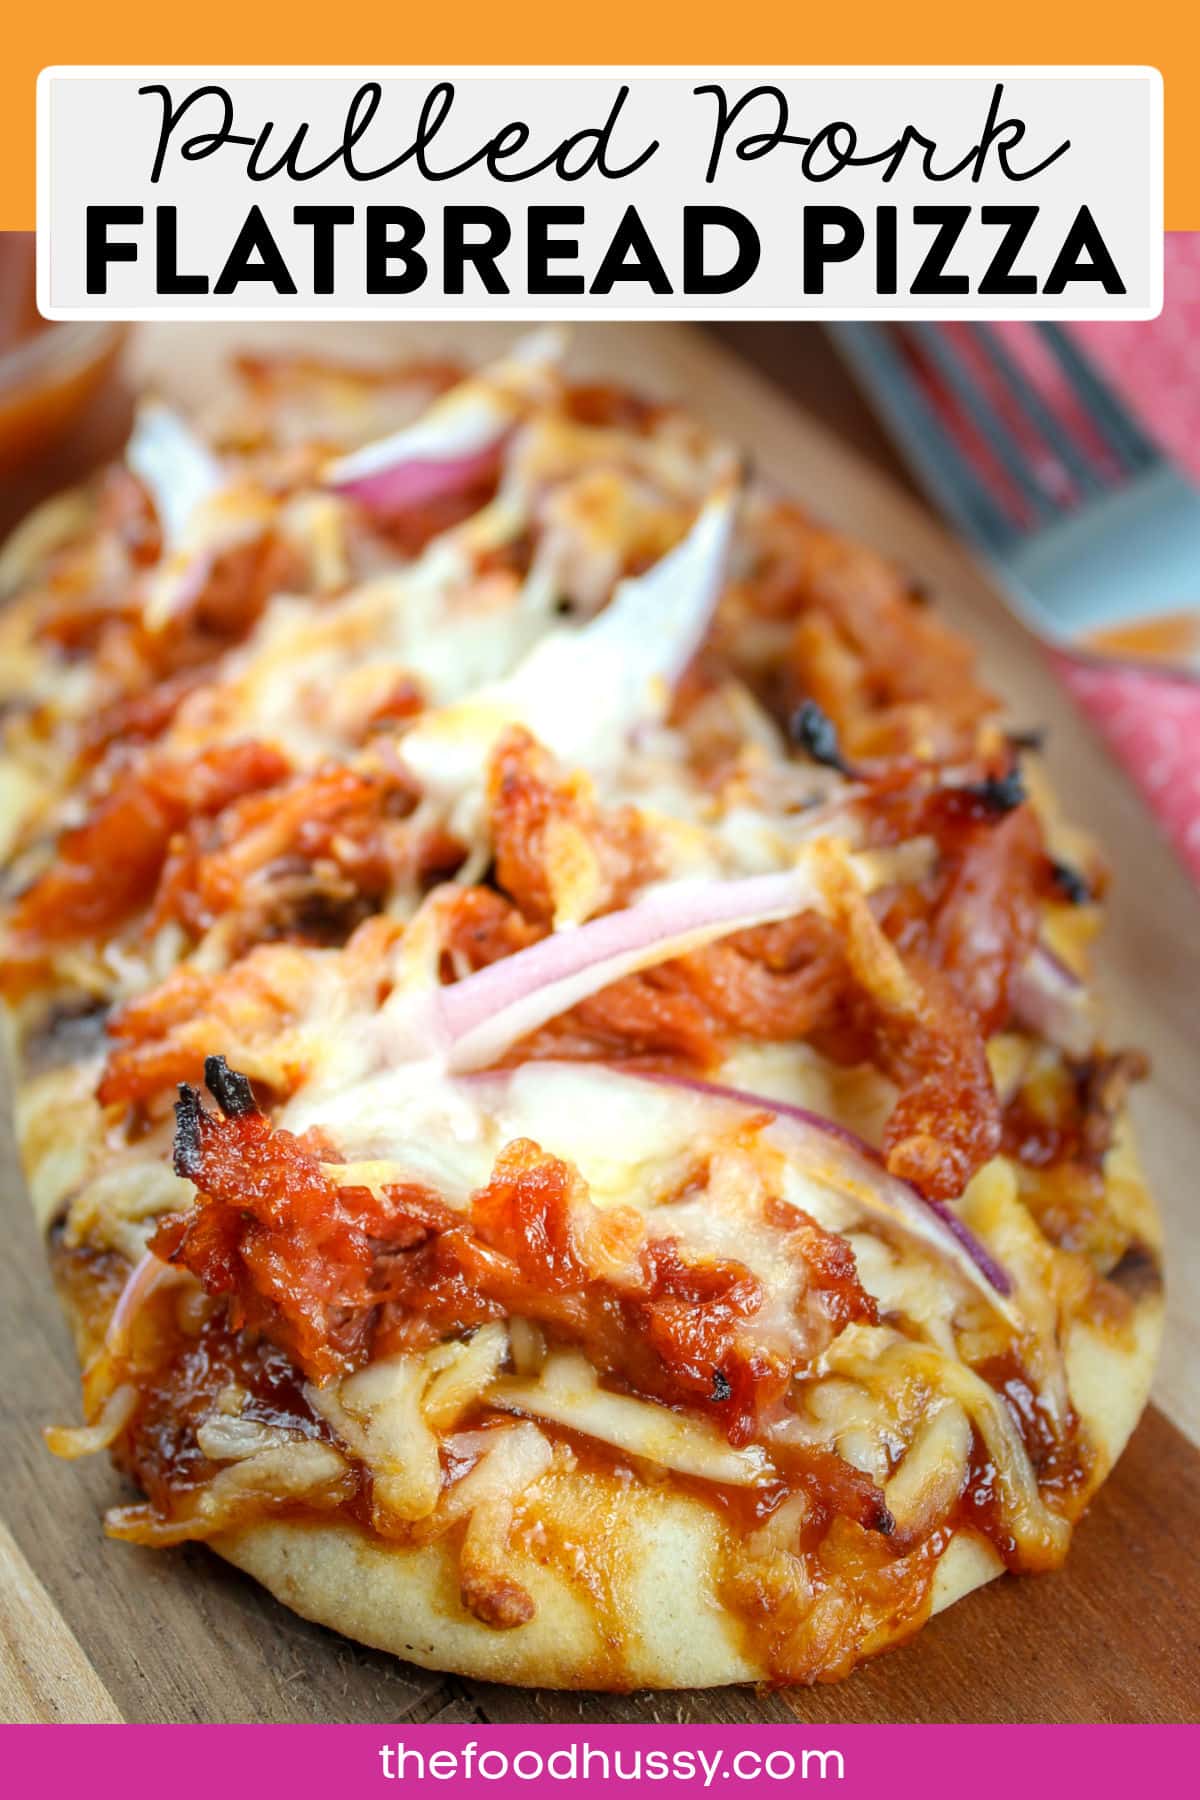 Pulled Pork Flatbread Pizza is one of my favorites and so easy to make! Load up your flatbread with pulled pork, barbecue sauce, cheese and red onions - yum! You can also make it in the air fryer!  via @foodhussy